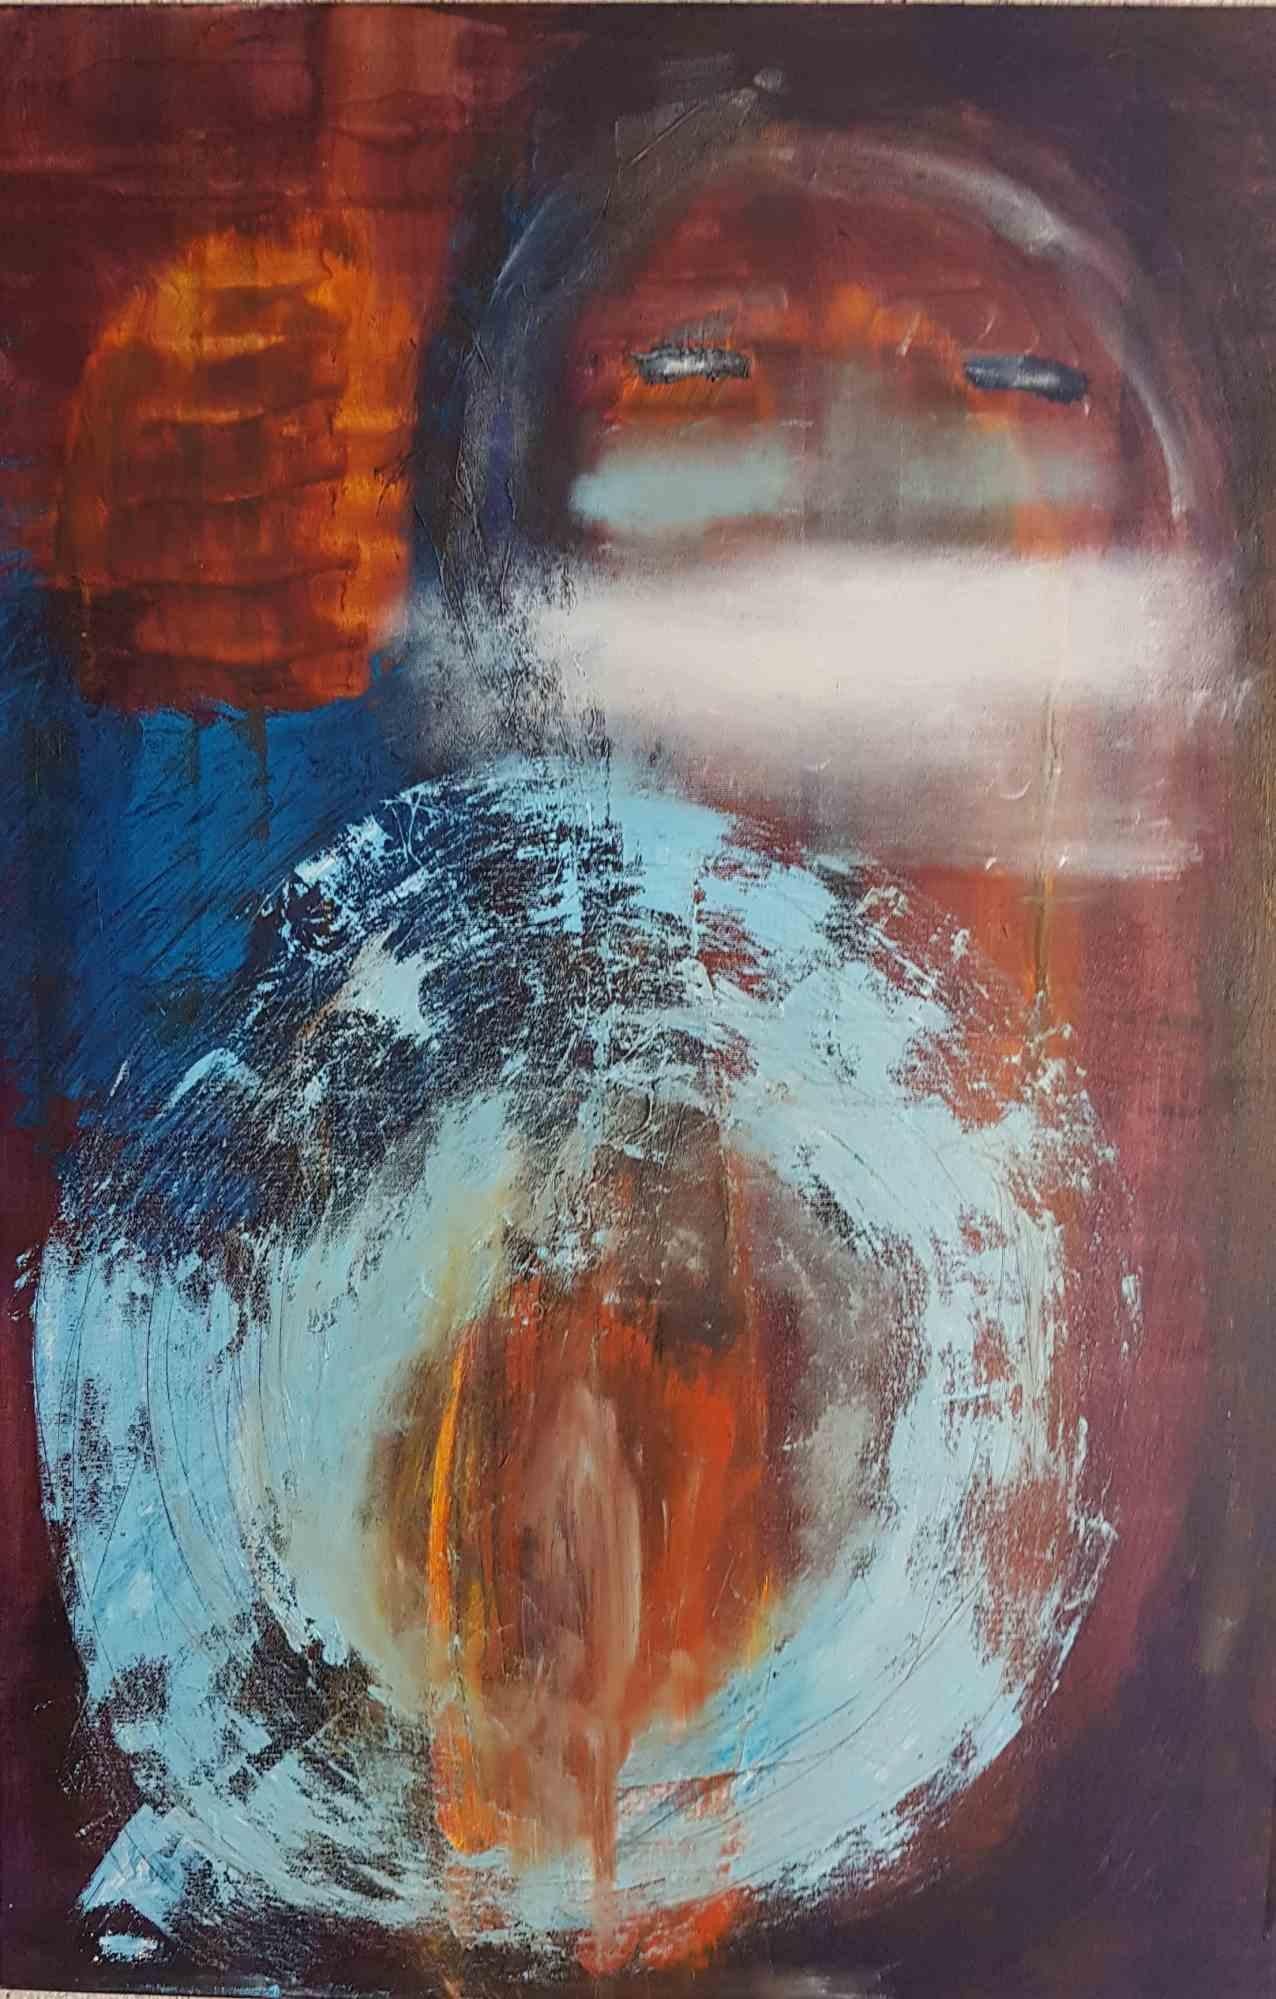 The mask is a beautiful acrylic painting realized by the Italian artist Paolo Cantù in 2019.

This is an original abstract artwork with bright and lively colors. 

The artist represents the ethereal and mysterious halo that is the meaning of the